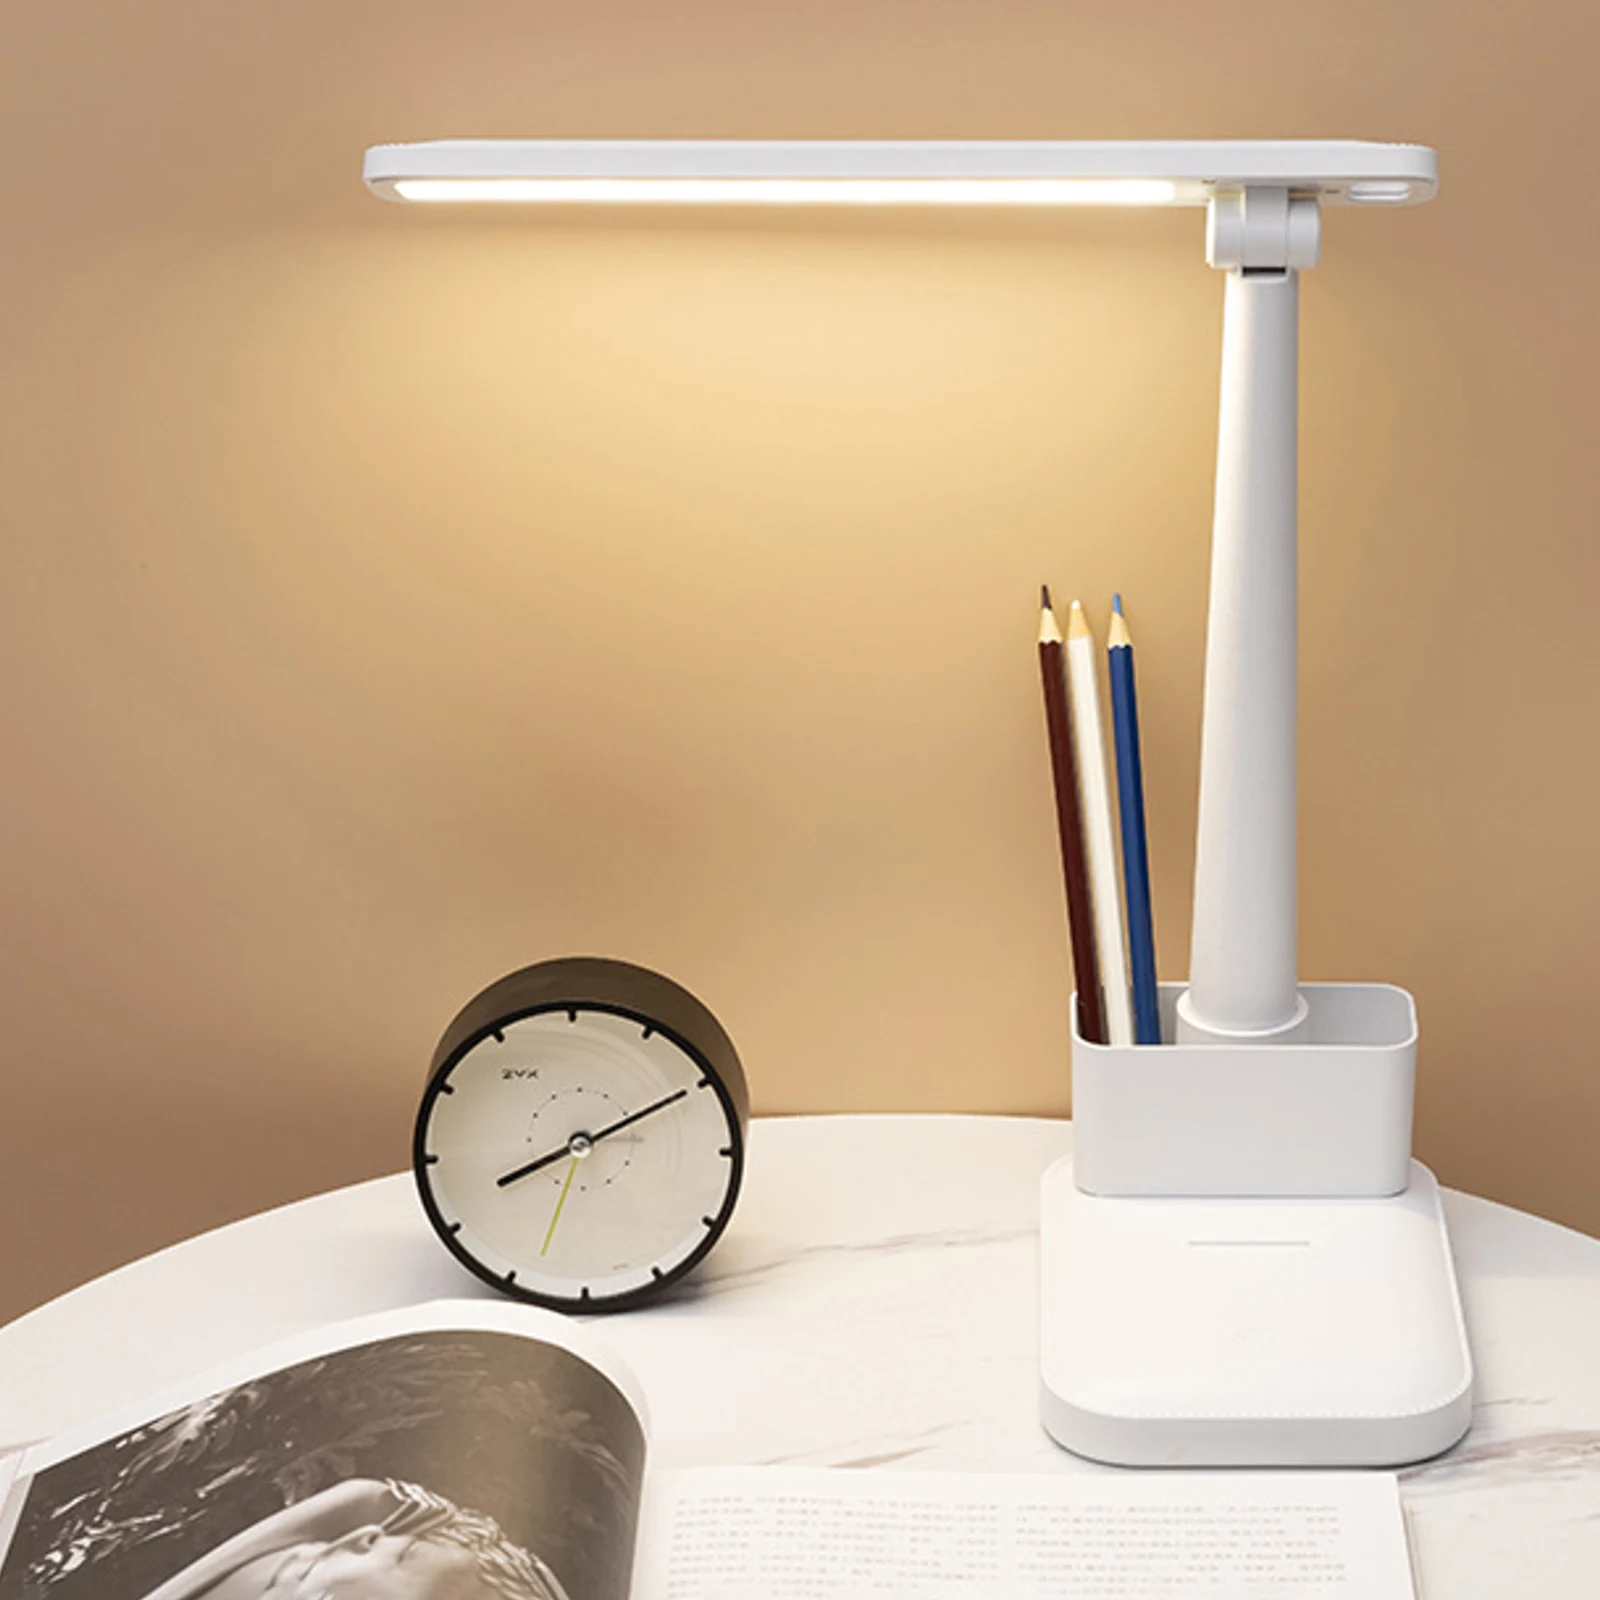 

LED Reading Desk Lamp with 3600mAh Battery Angle Adjustable Table Lamp Multipurpose Touch Control Bedside Table Lamp for Bedroom